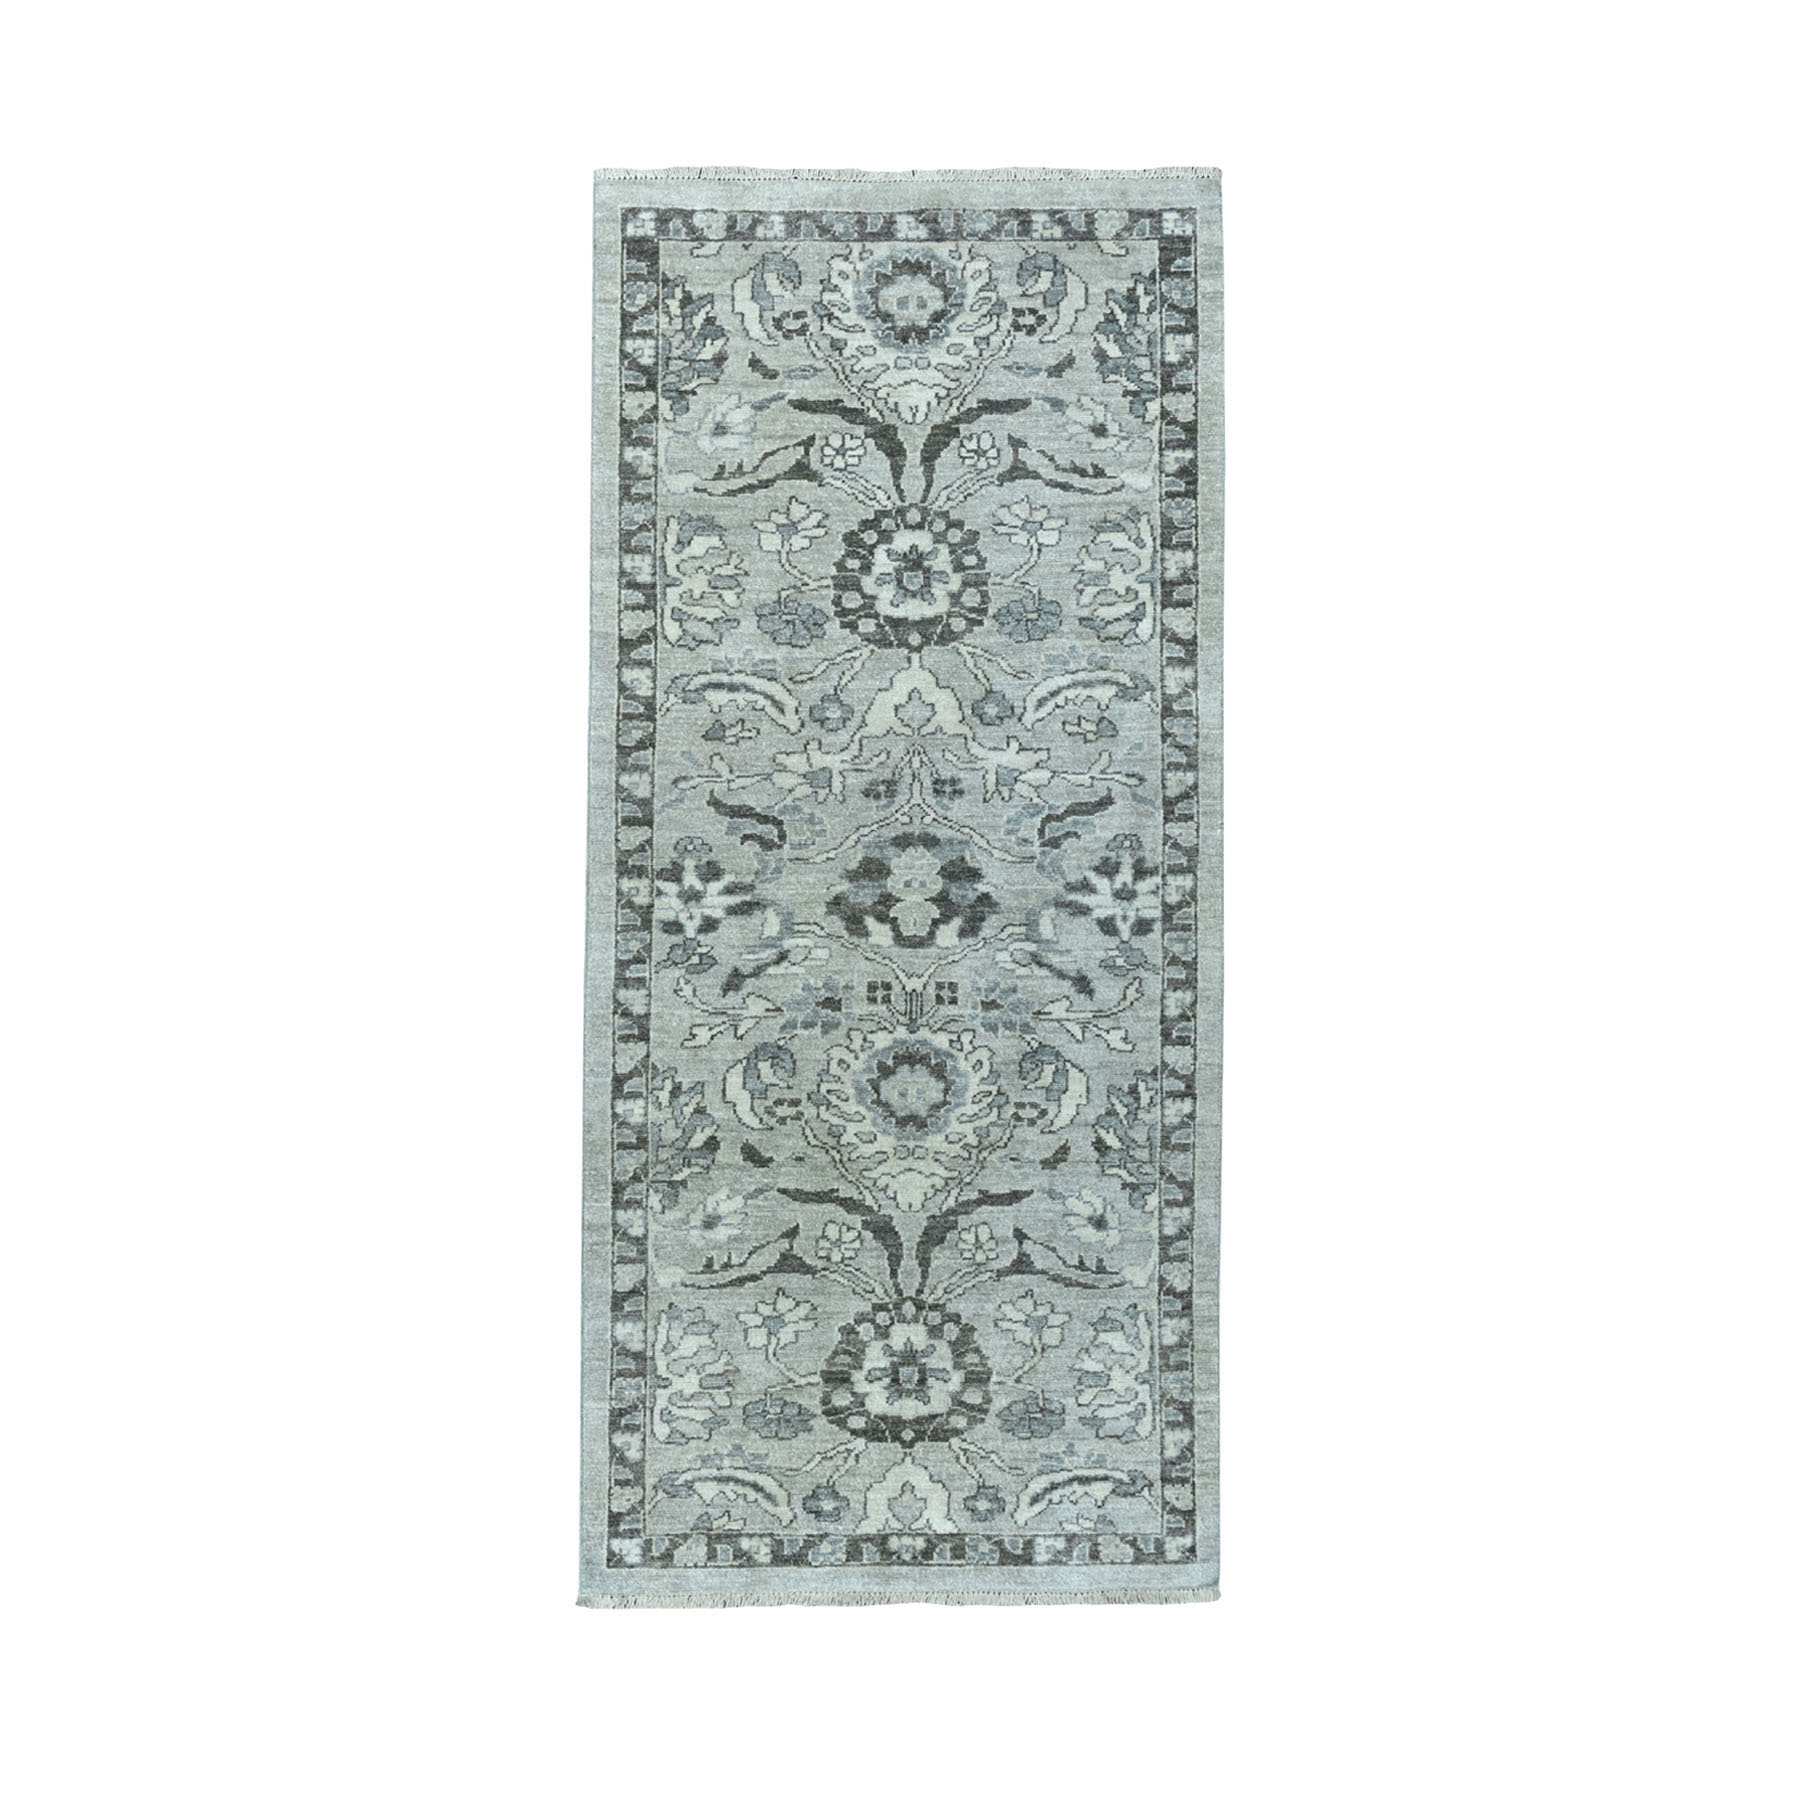 2-7 x5-9  Undyed Natural Wool Mahal Design Runner Hand Knotted Oriental Rug 